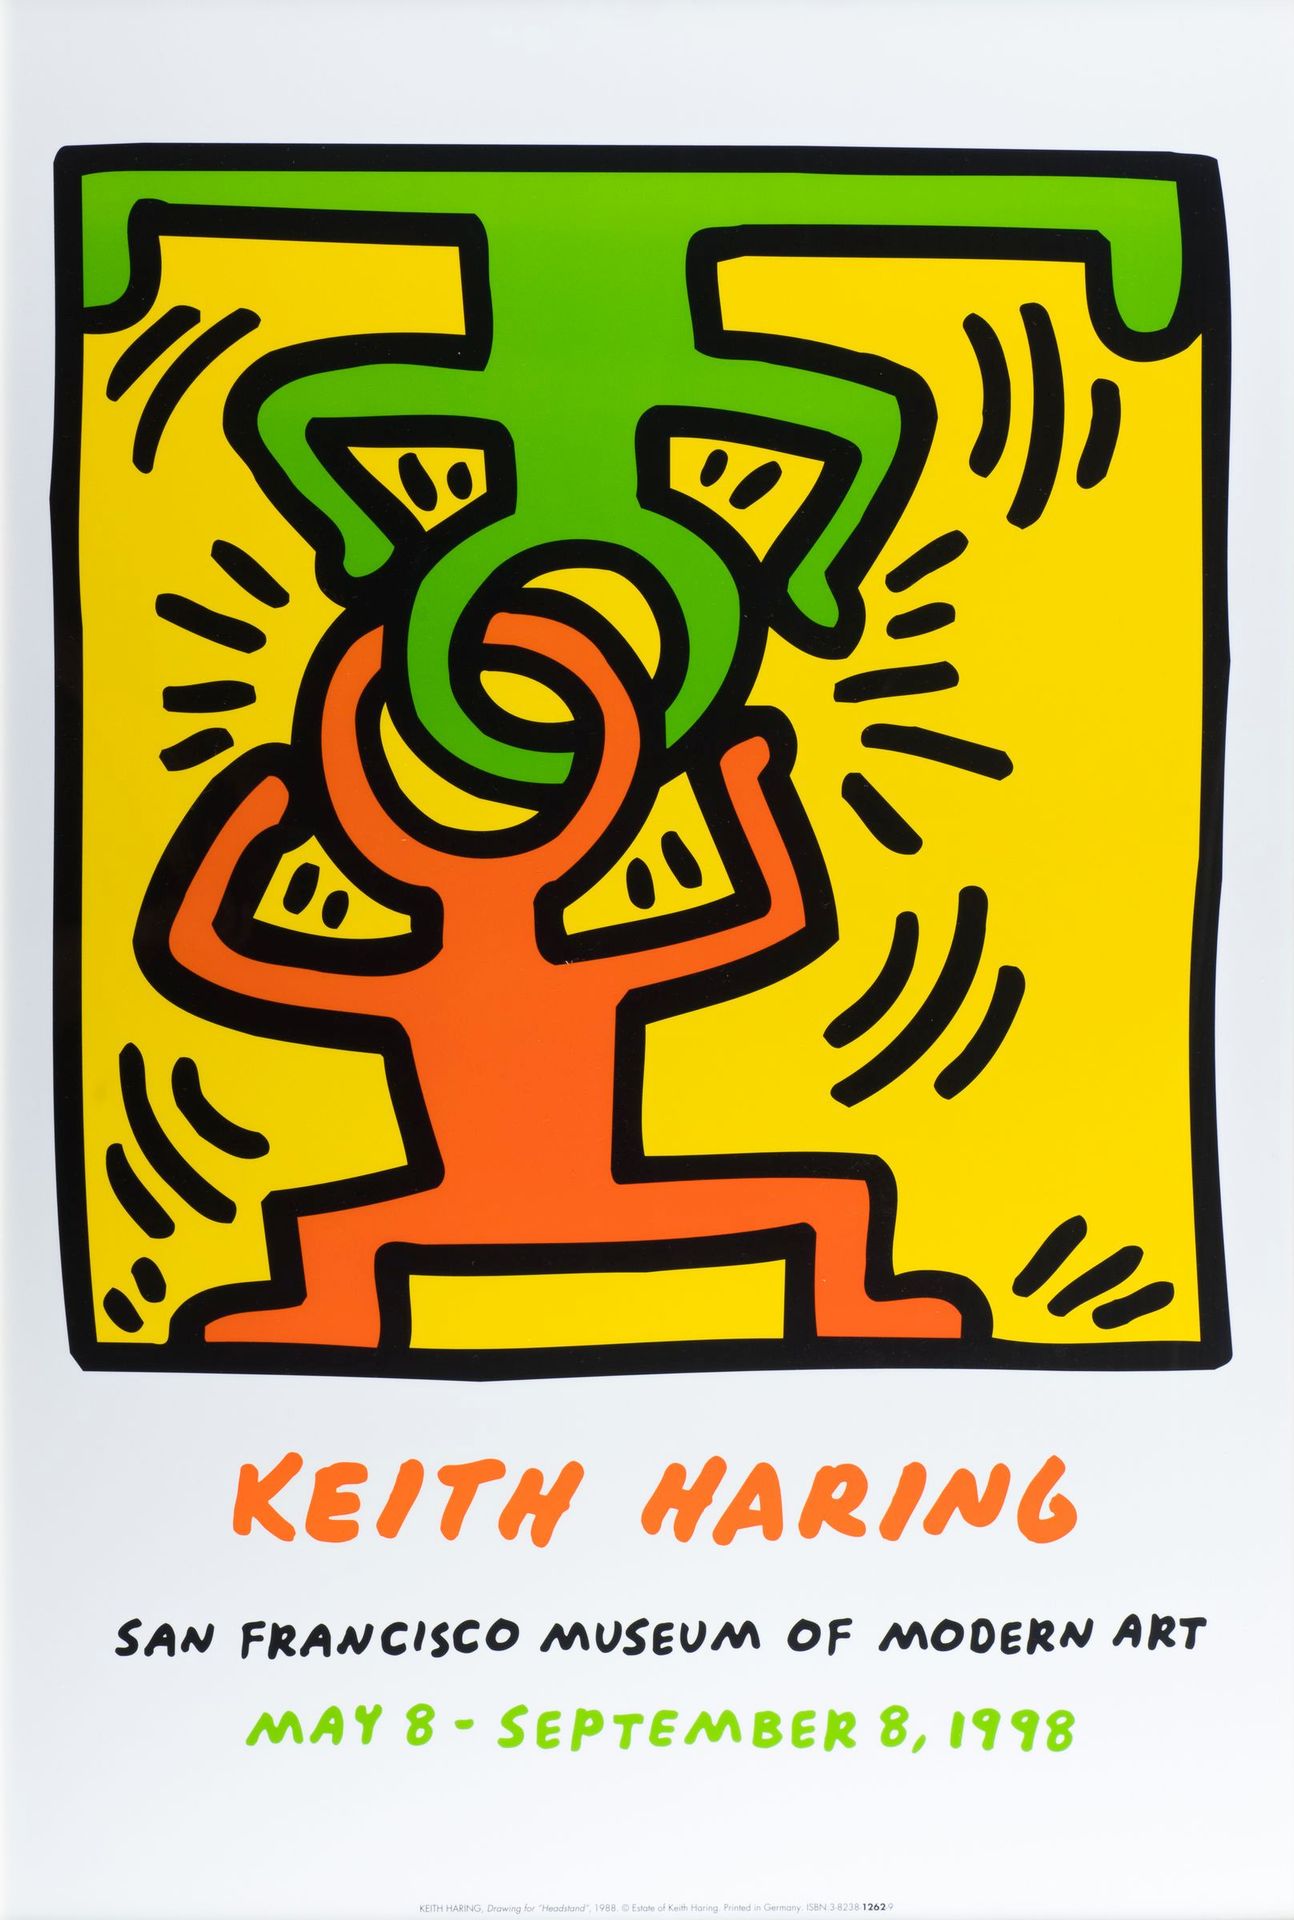 Null KEITH HARING

Headstands/San Francisco Museum, 1998

在版画上签名的绢画

91x60厘米